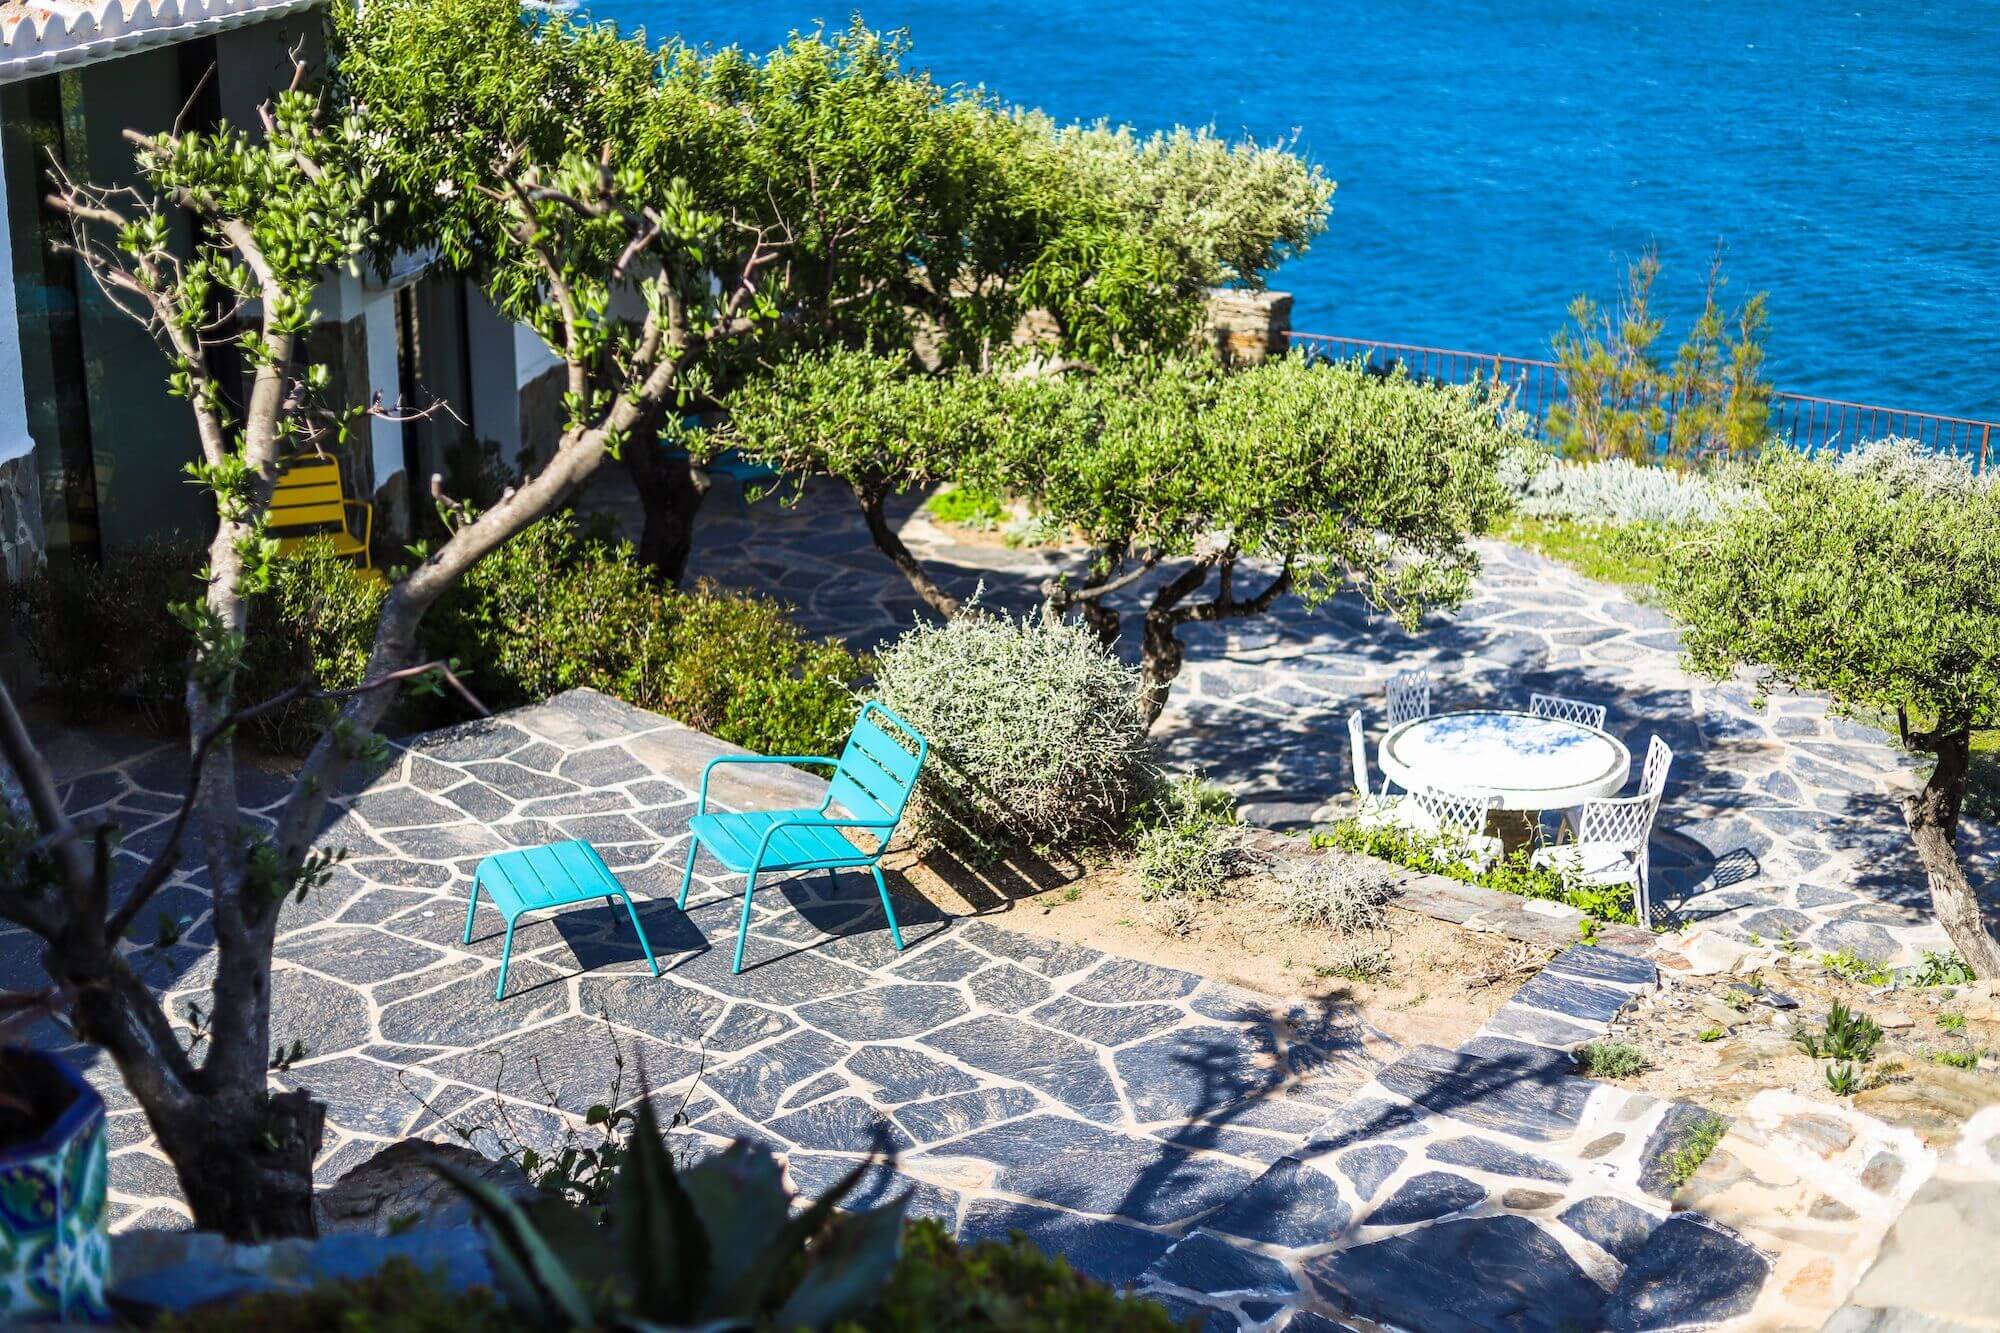 An exceptional seaside villa for a seminar on the Mediterranean, combining work sessions and teambuilding.